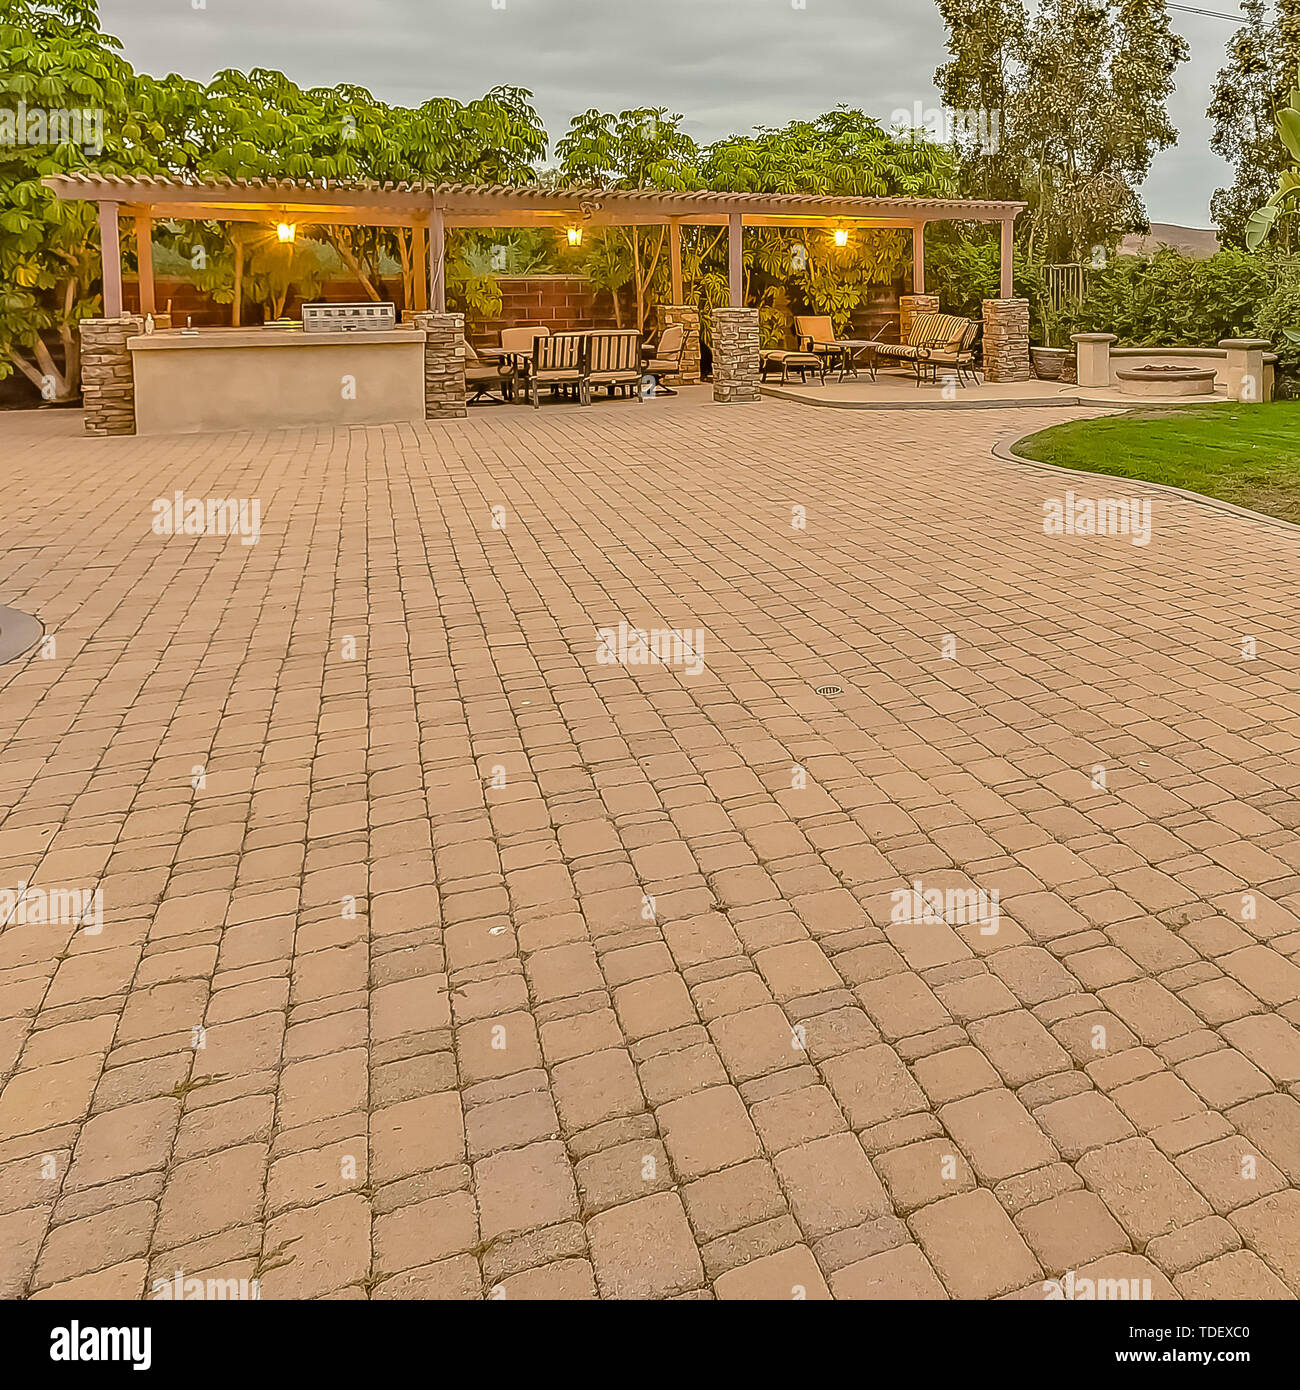 Square Stone Brick Driveway And Patio With Fire Pit And Dining